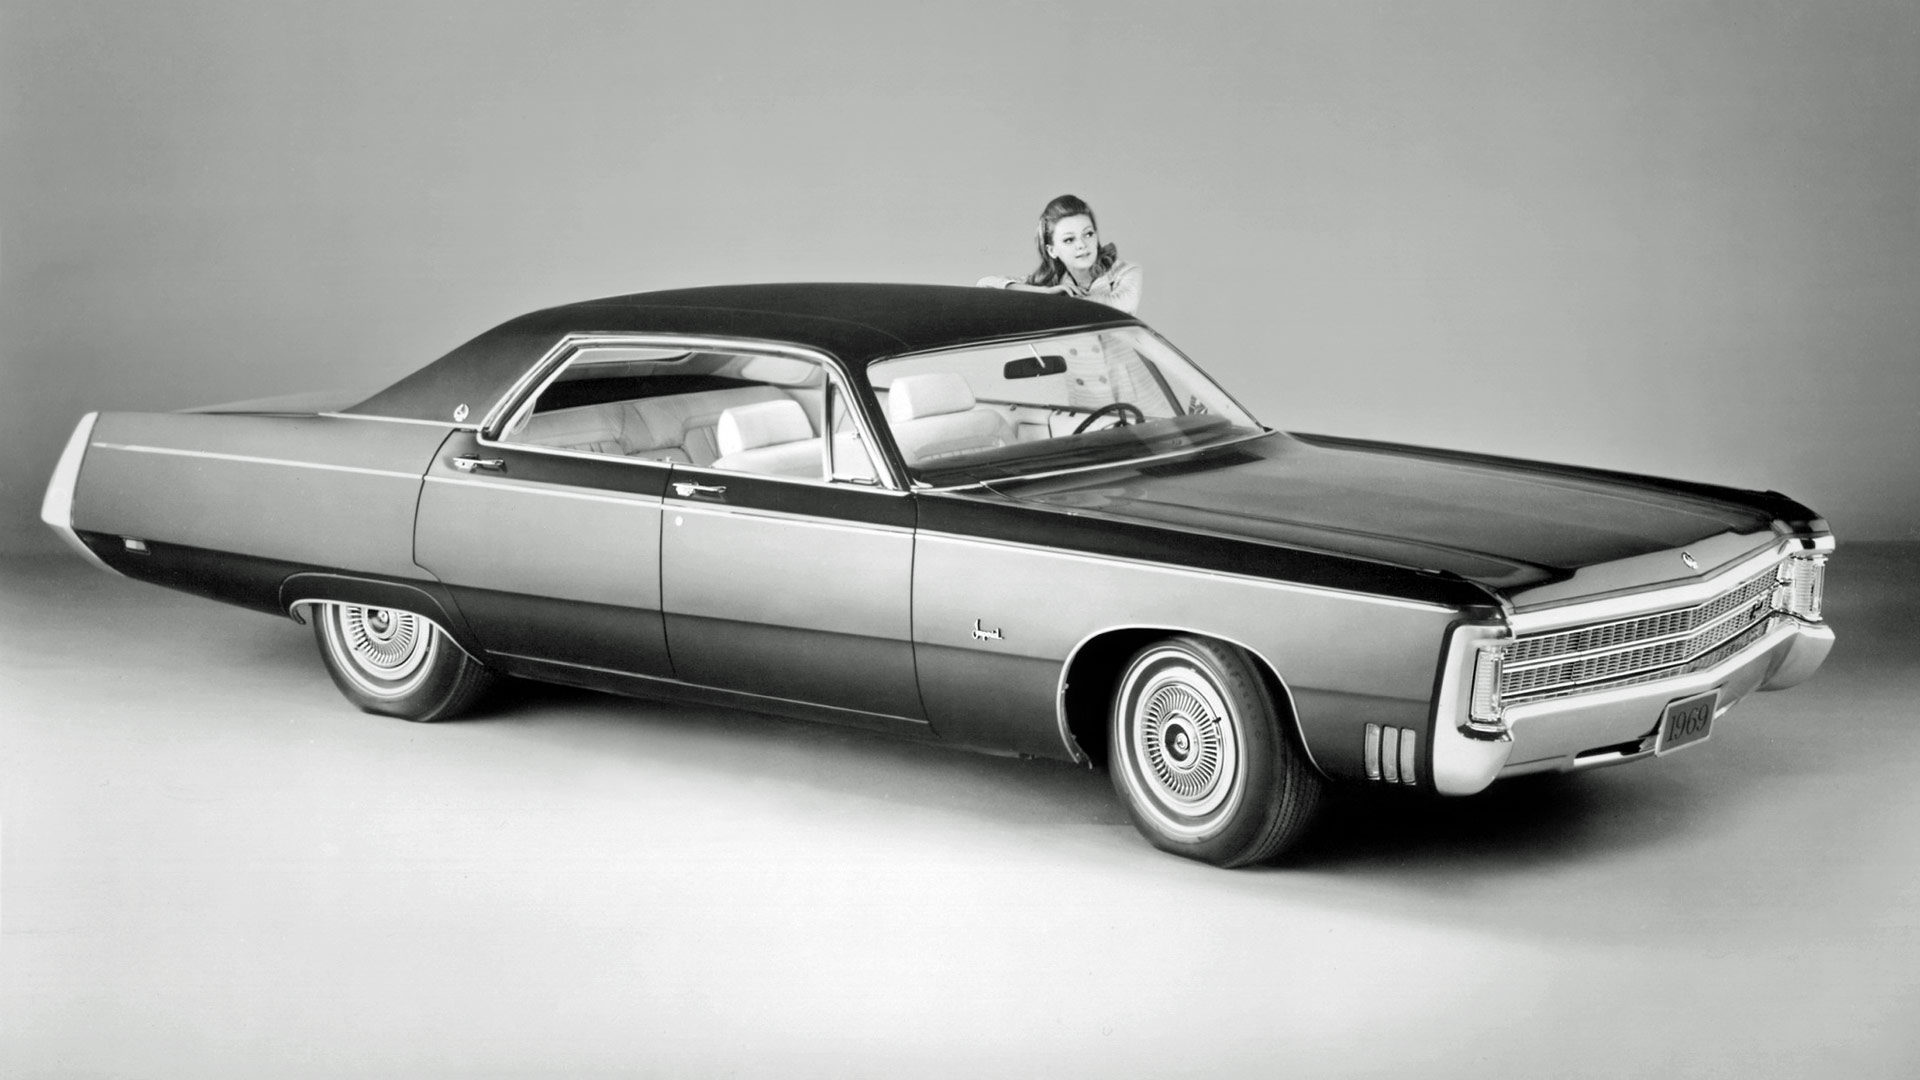 1969 Imperial LeBaron – 229.7 inches